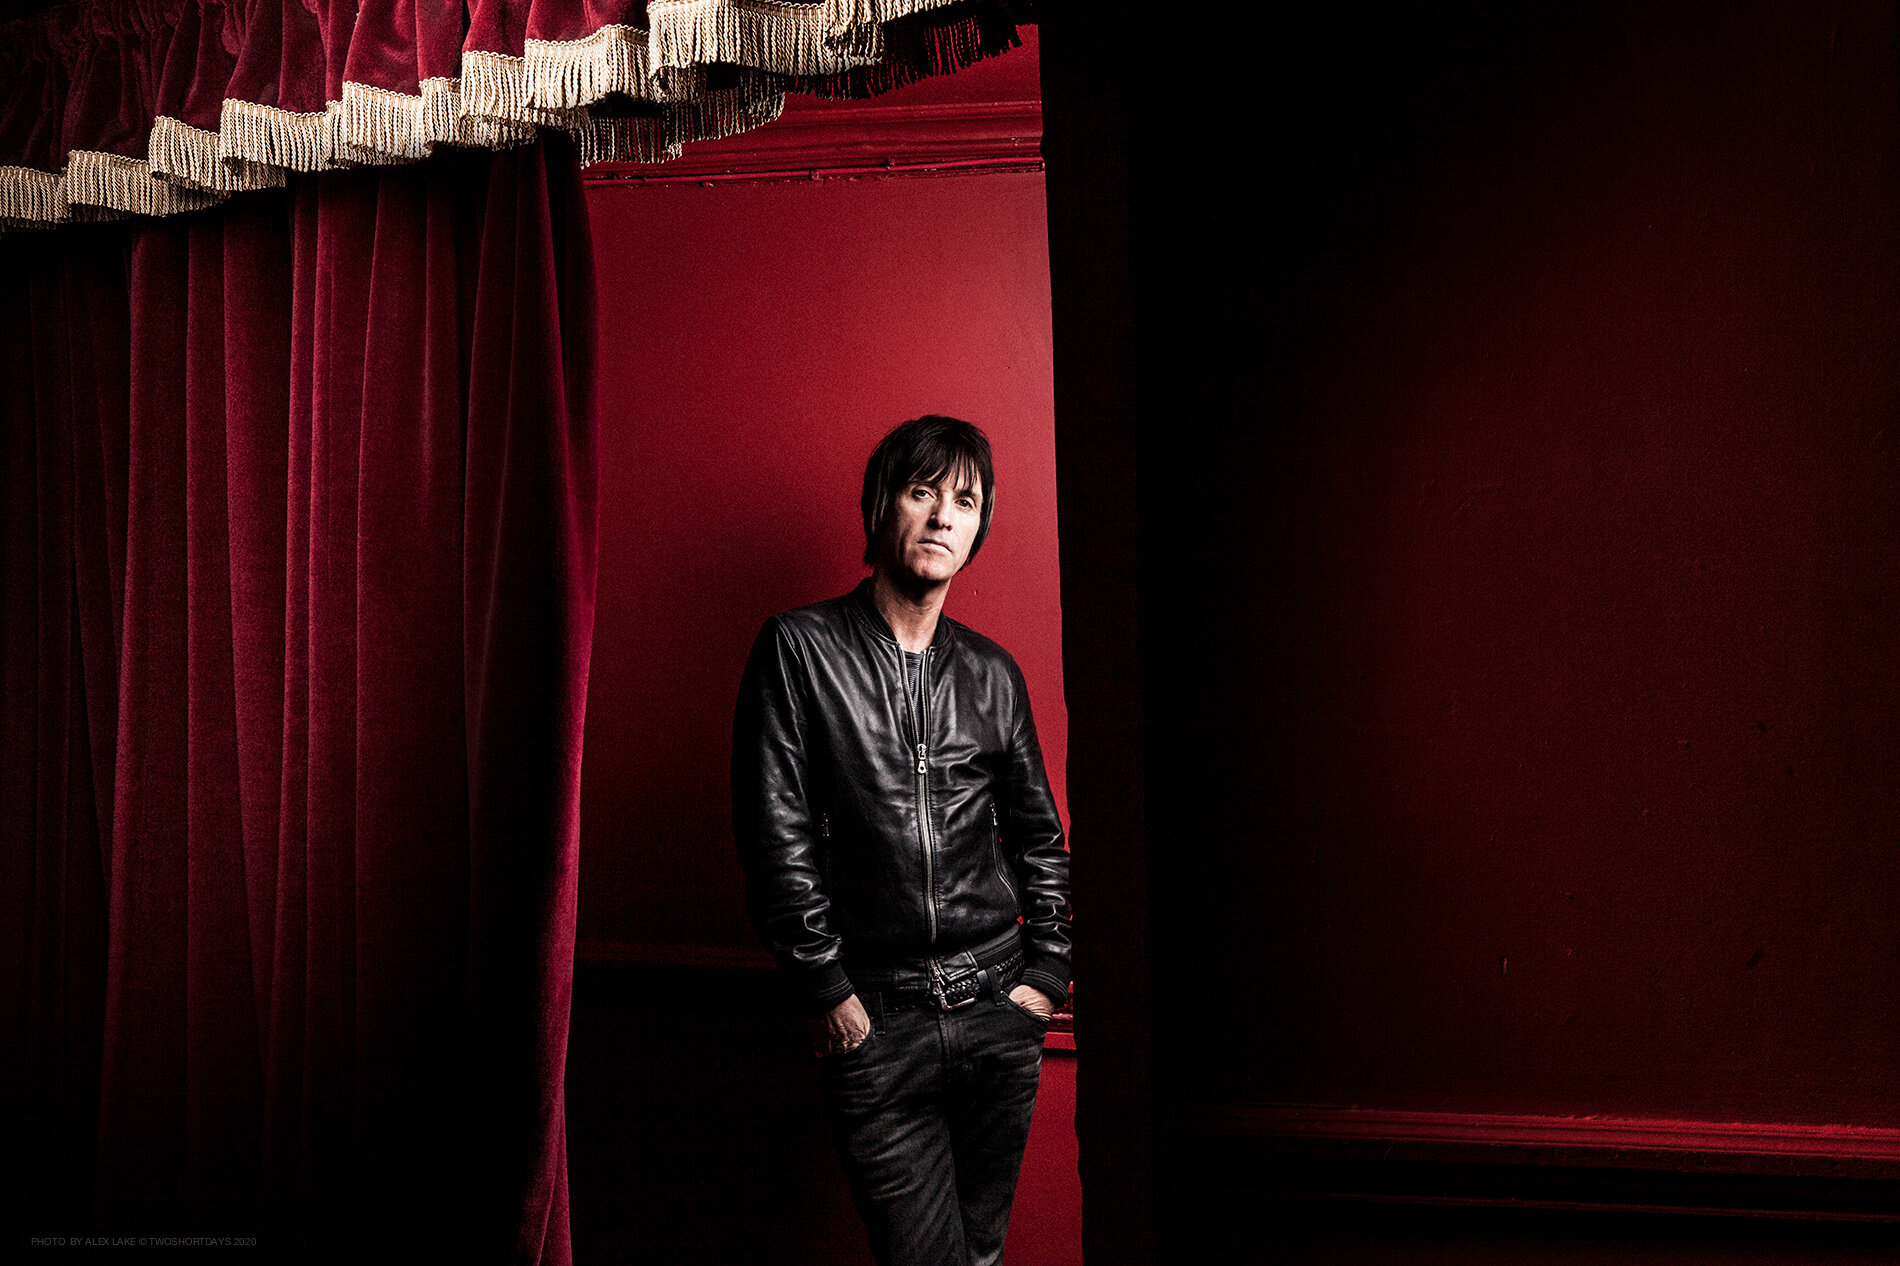 johnny_marr_photography_copyright_ALEX_LAKE_do_not_reproduce_without_permission_TWOSHORTDAYS.jpg